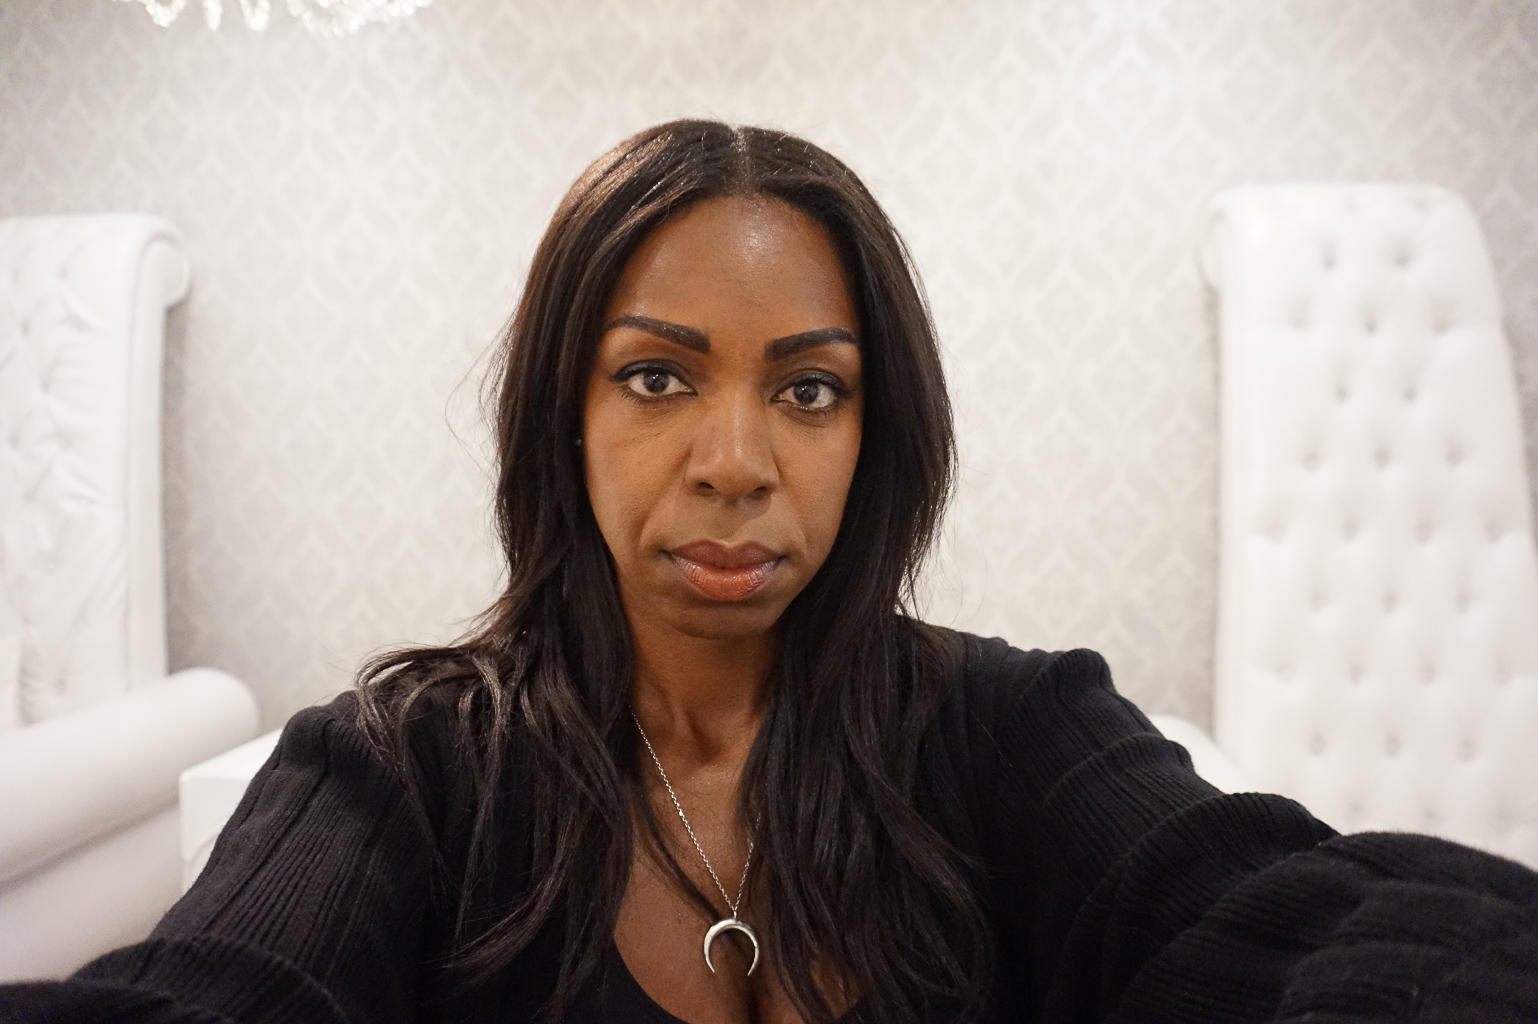 I Got Dermal Fillers And This is What Happened - Belotero at Oxygen MediSpa | Style Domination by Dominique Baker